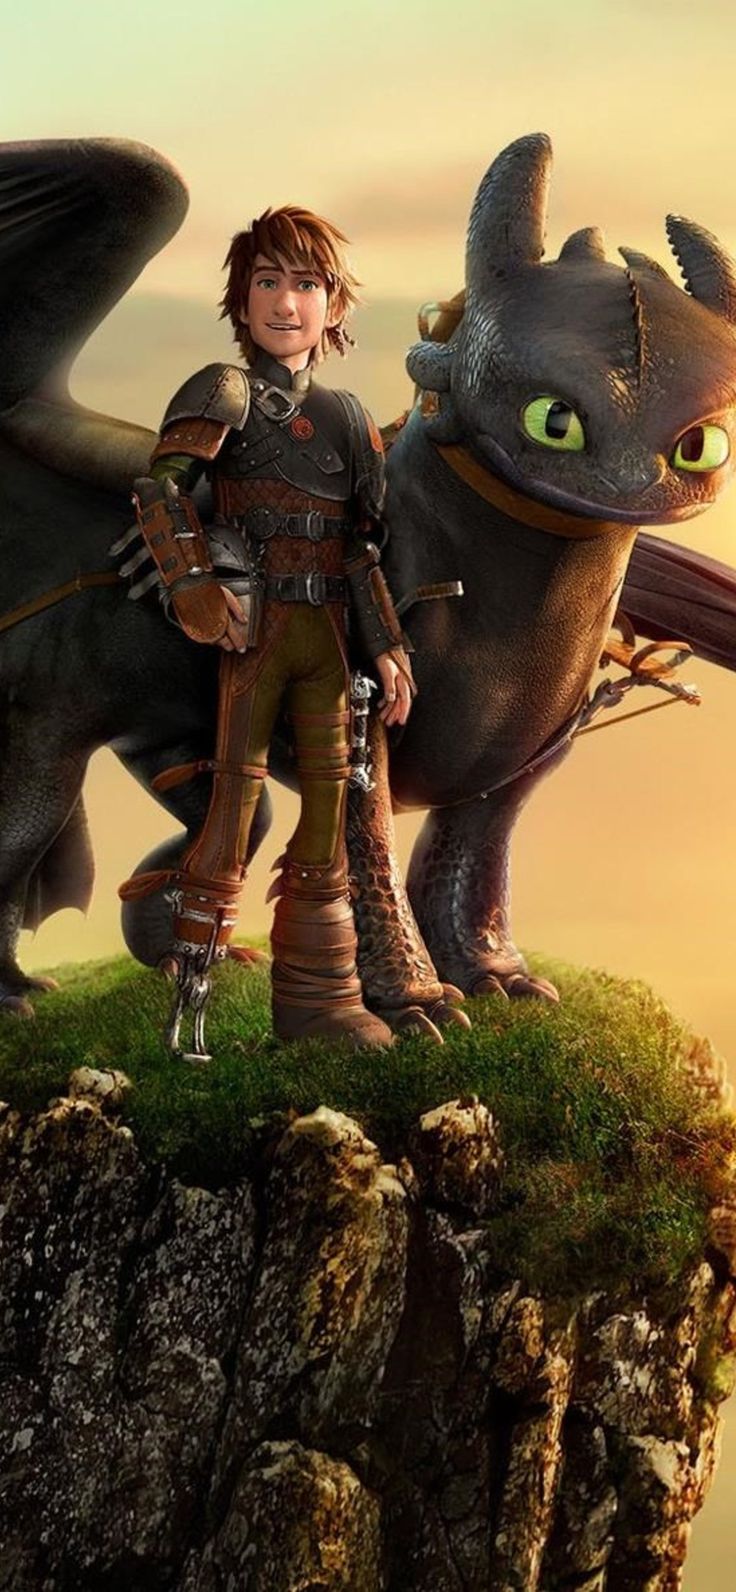 How To Train Your Dragon Wallpaper. How to train your dragon, How train your dragon, How to train dragon